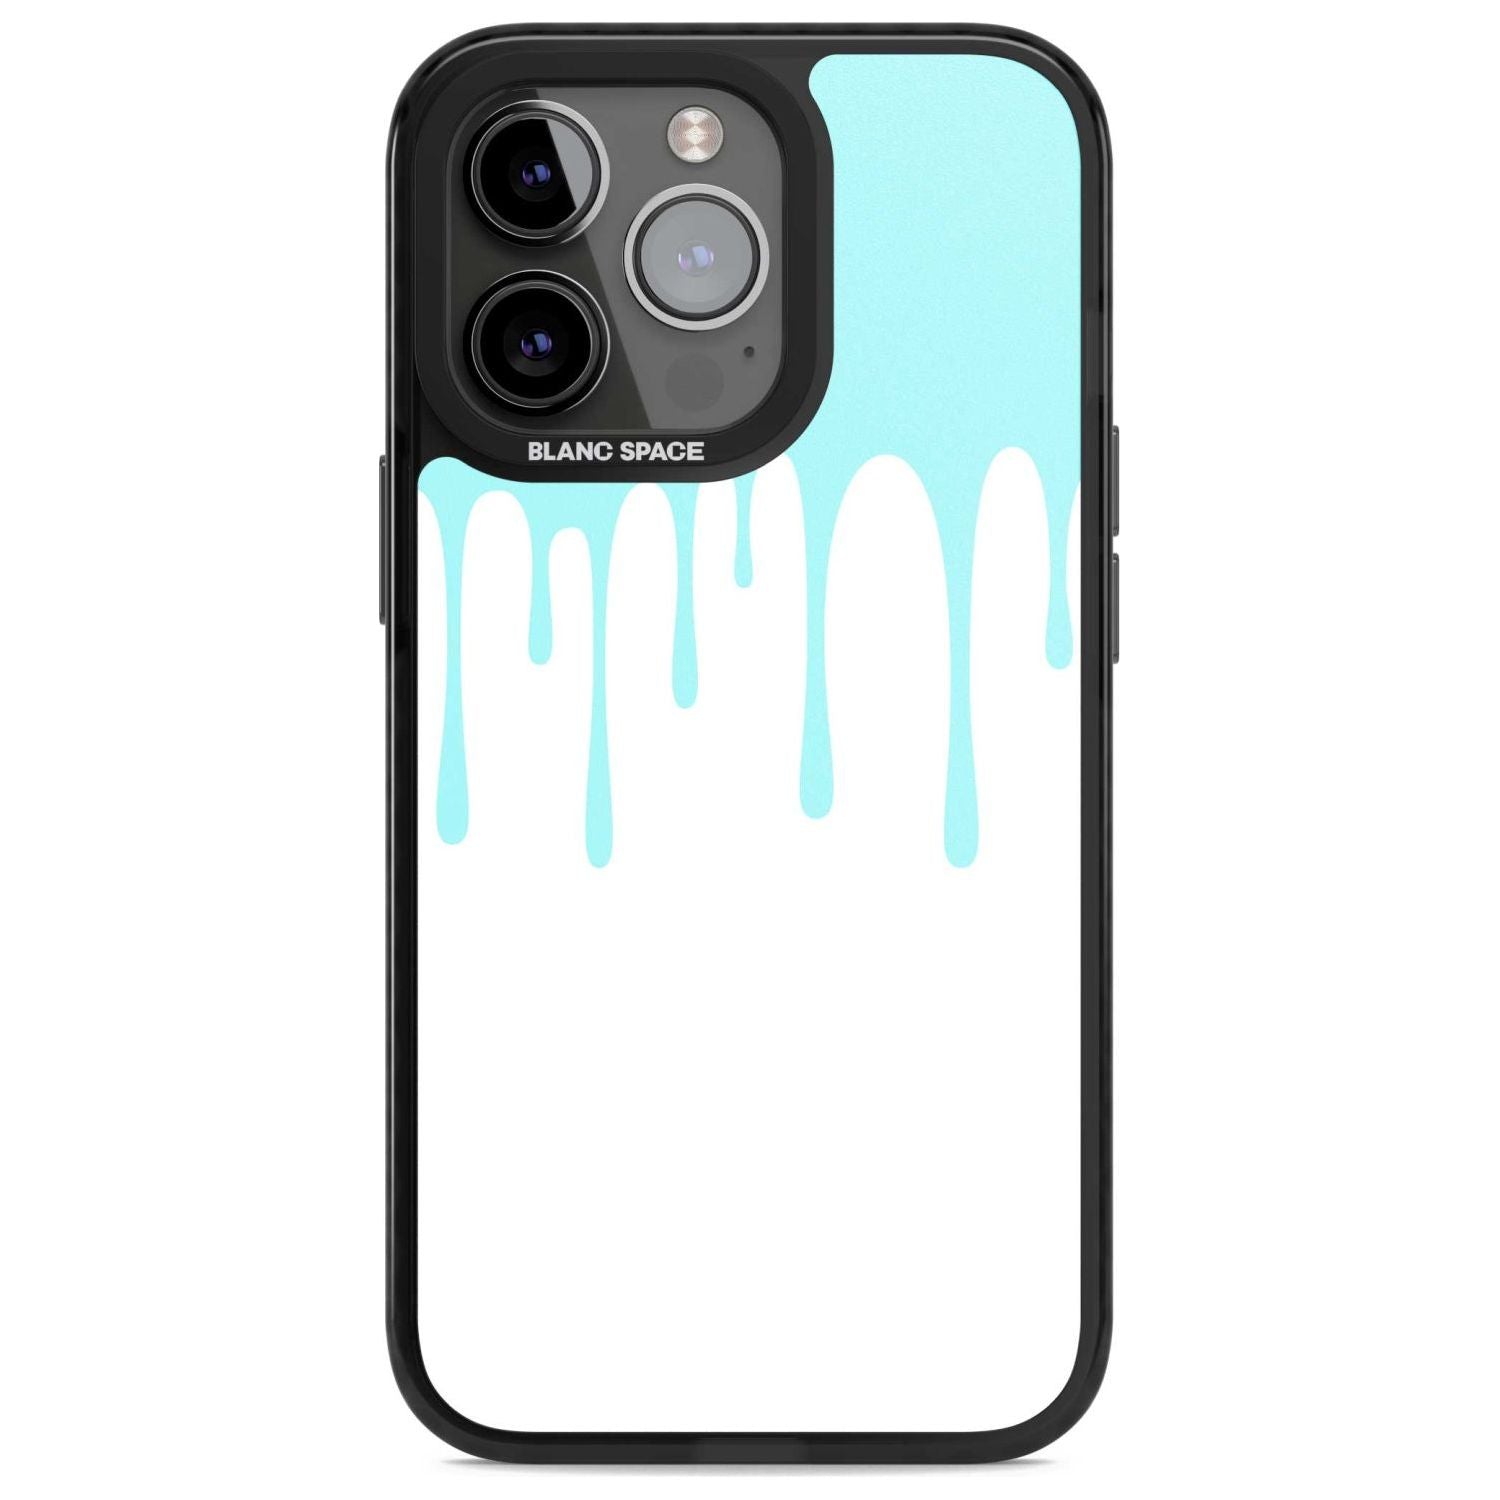 Melted Effect: Teal & White Phone Case iPhone 15 Pro Max / Magsafe Black Impact Case,iPhone 15 Pro / Magsafe Black Impact Case,iPhone 14 Pro Max / Magsafe Black Impact Case,iPhone 14 Pro / Magsafe Black Impact Case,iPhone 13 Pro / Magsafe Black Impact Case Blanc Space